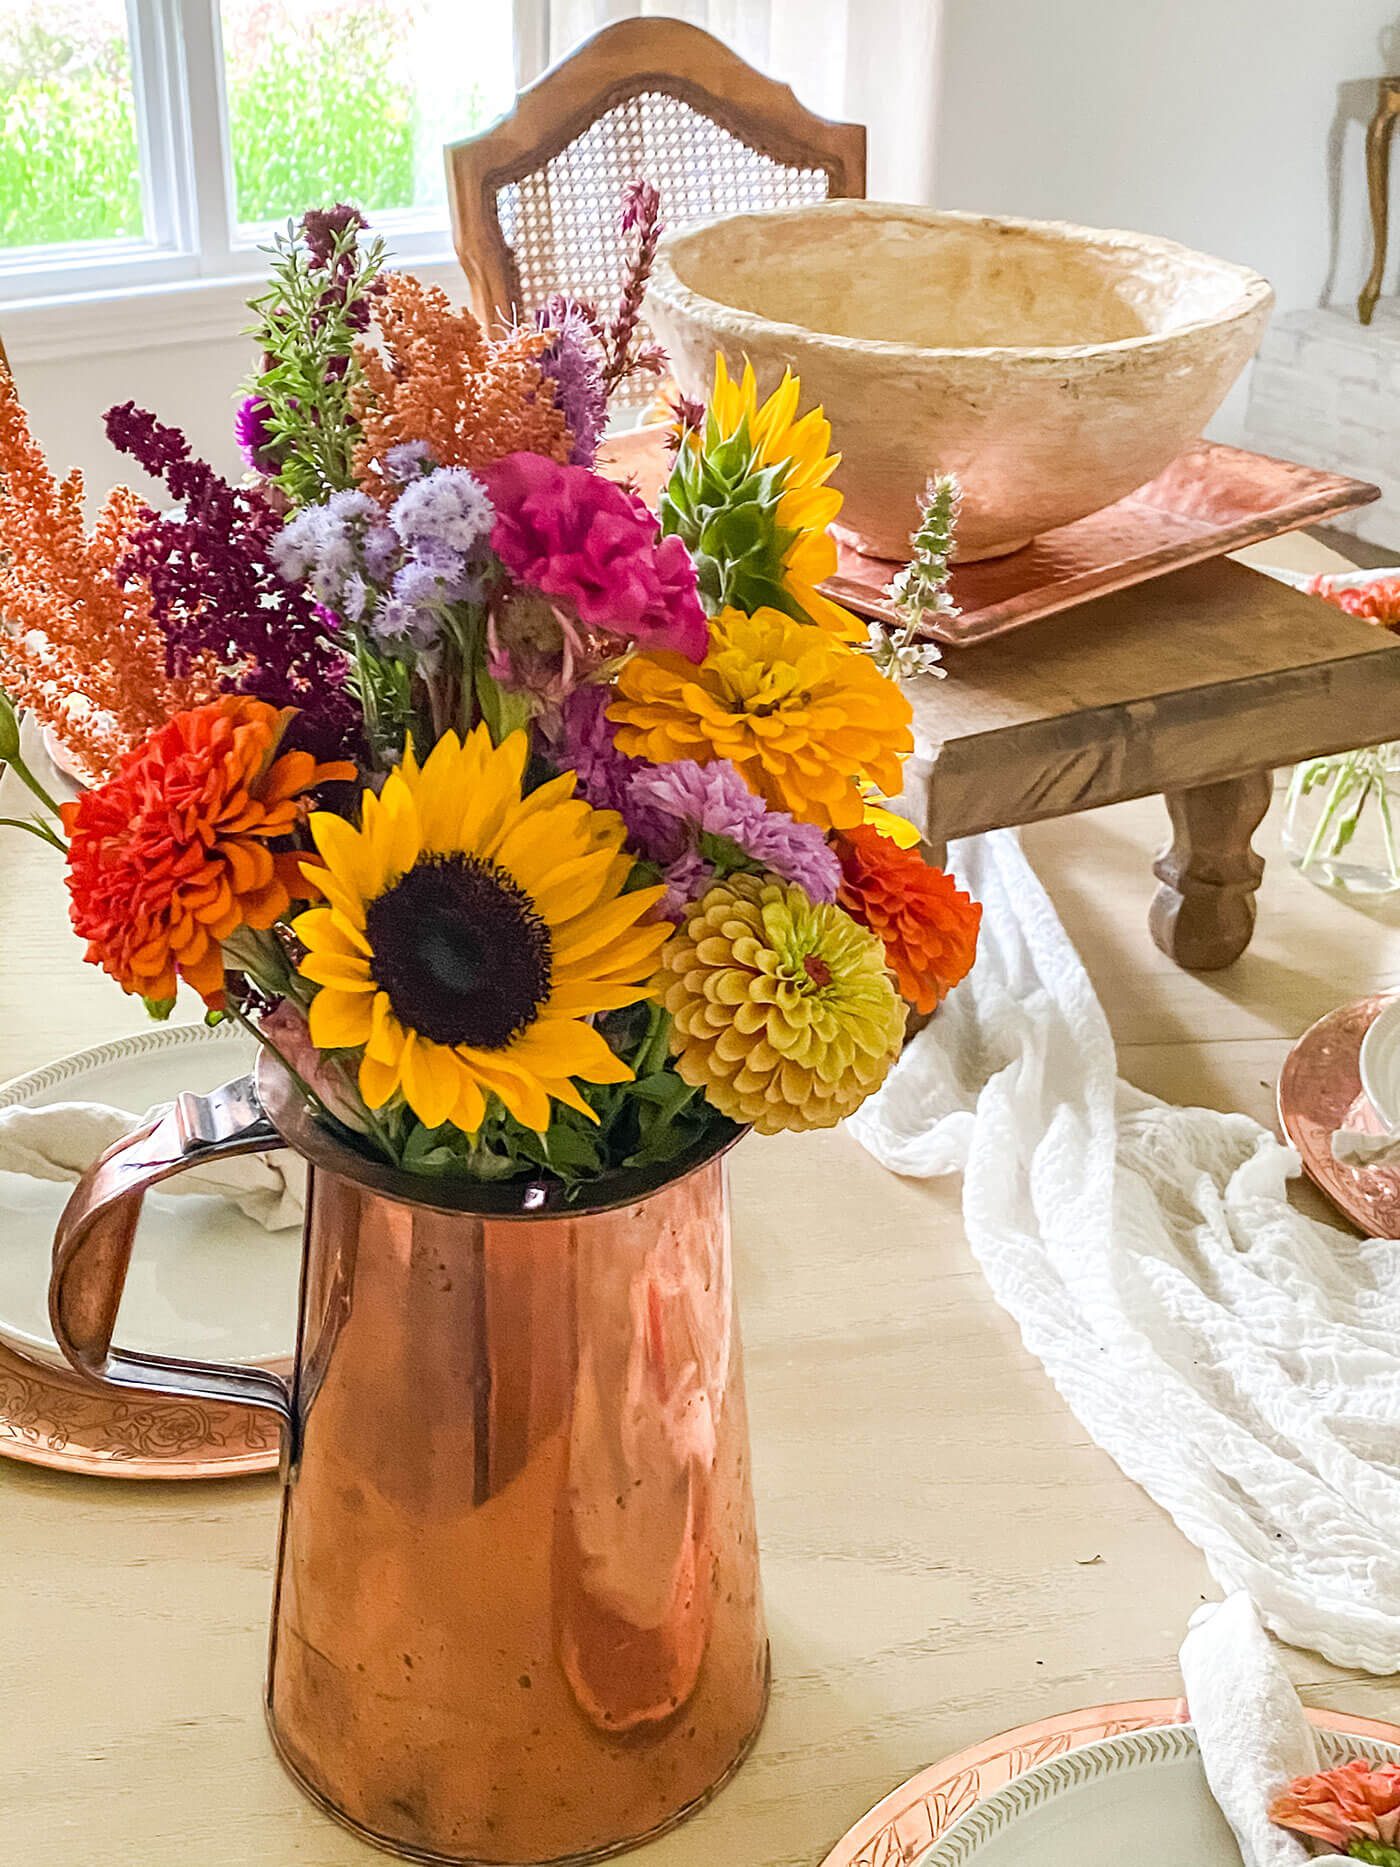 vase of sunflowers and other flowers close up photo for natural fall farmhouse decorating